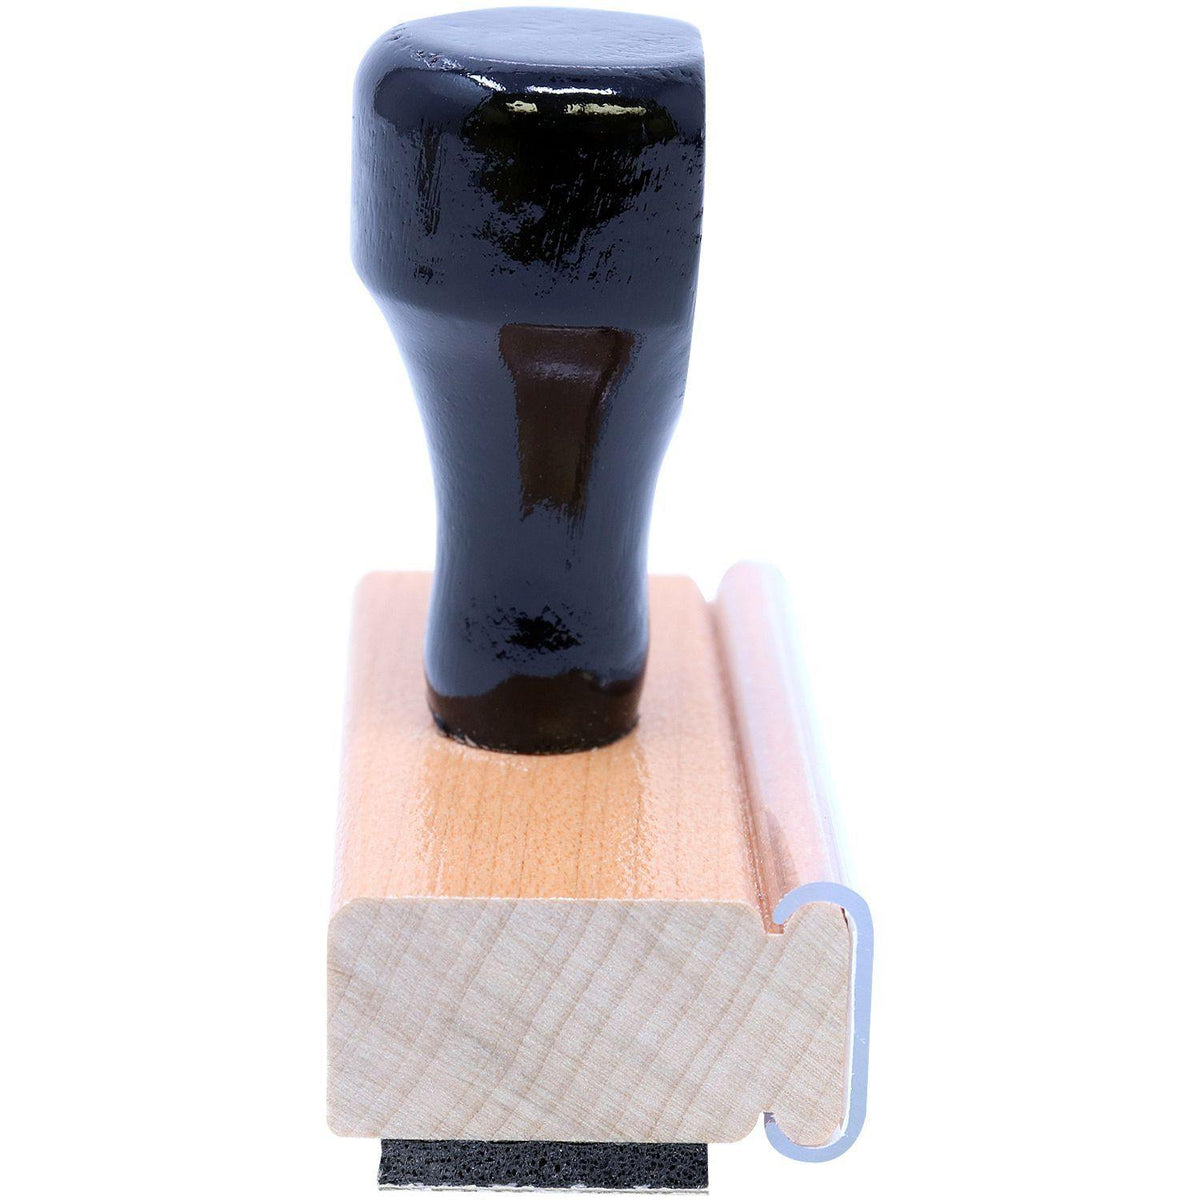 Round Sad Face Rubber Stamp - Engineer Seal Stamps - Brand_Acorn, Impression Size_Small, Stamp Type_Regular Stamp, Type of Use_General, Type of Use_Teacher